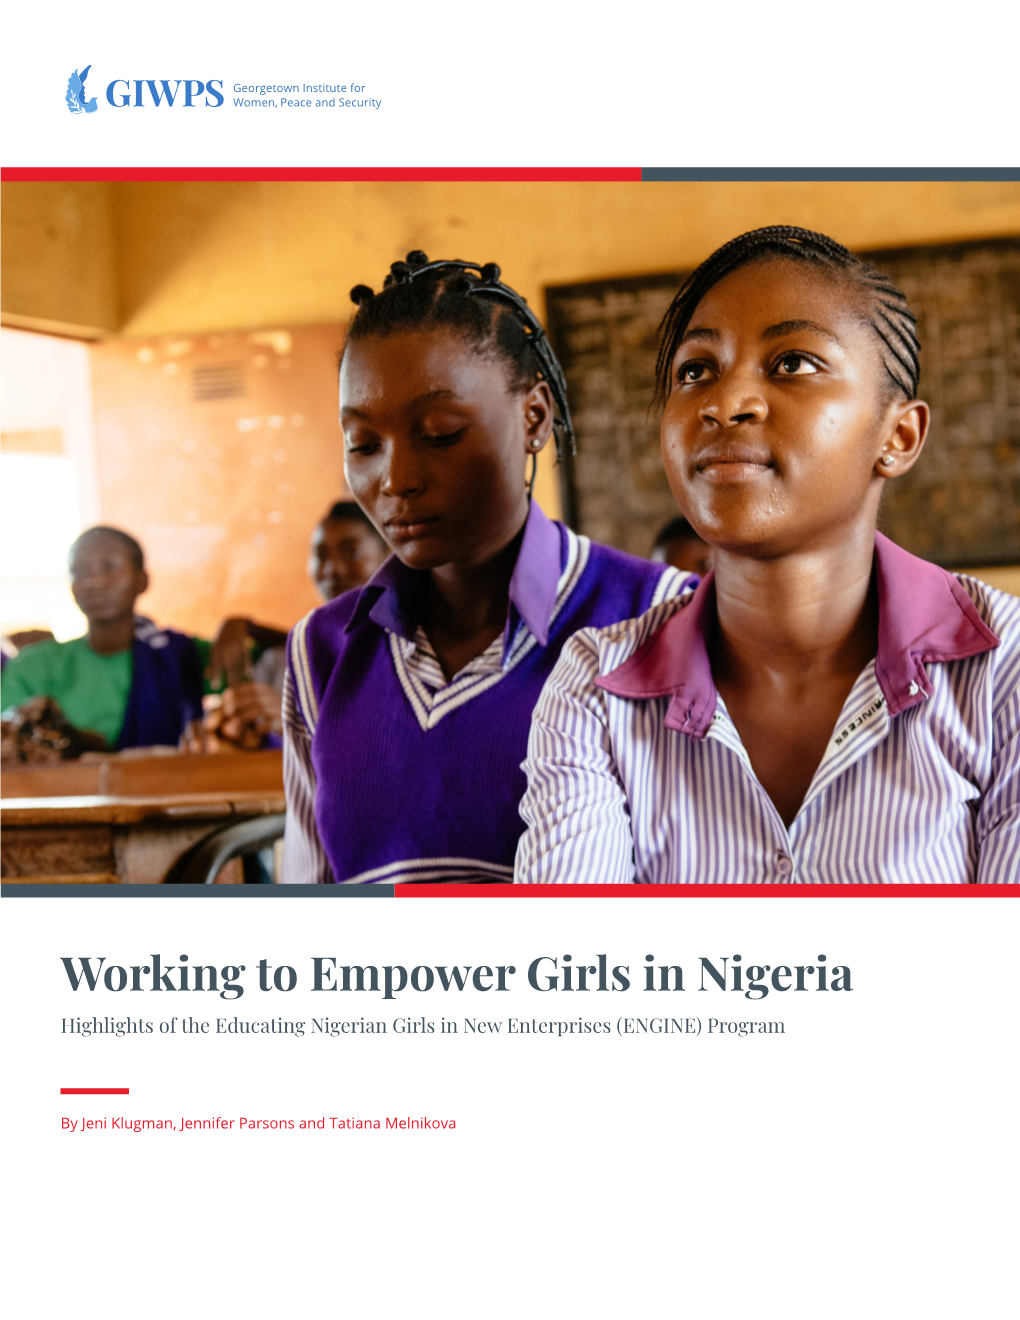 Working to Empower Girls in Nigeria Highlights of the Educating Nigerian Girls in New Enterprises (ENGINE) Program